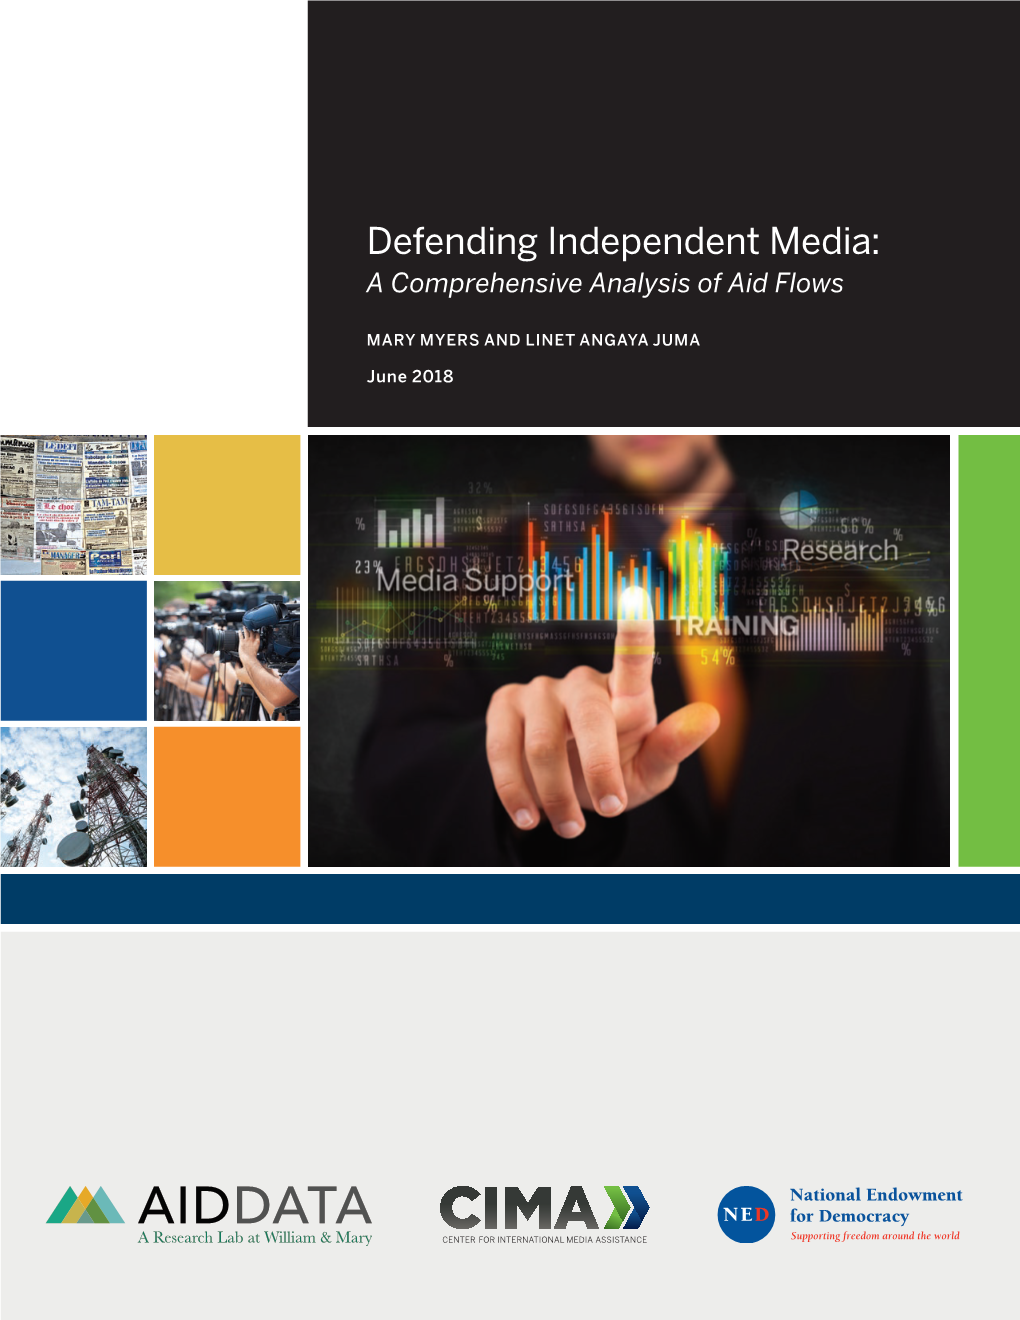 Defending Independent Media: a Comprehensive Analysis of Aid Flows